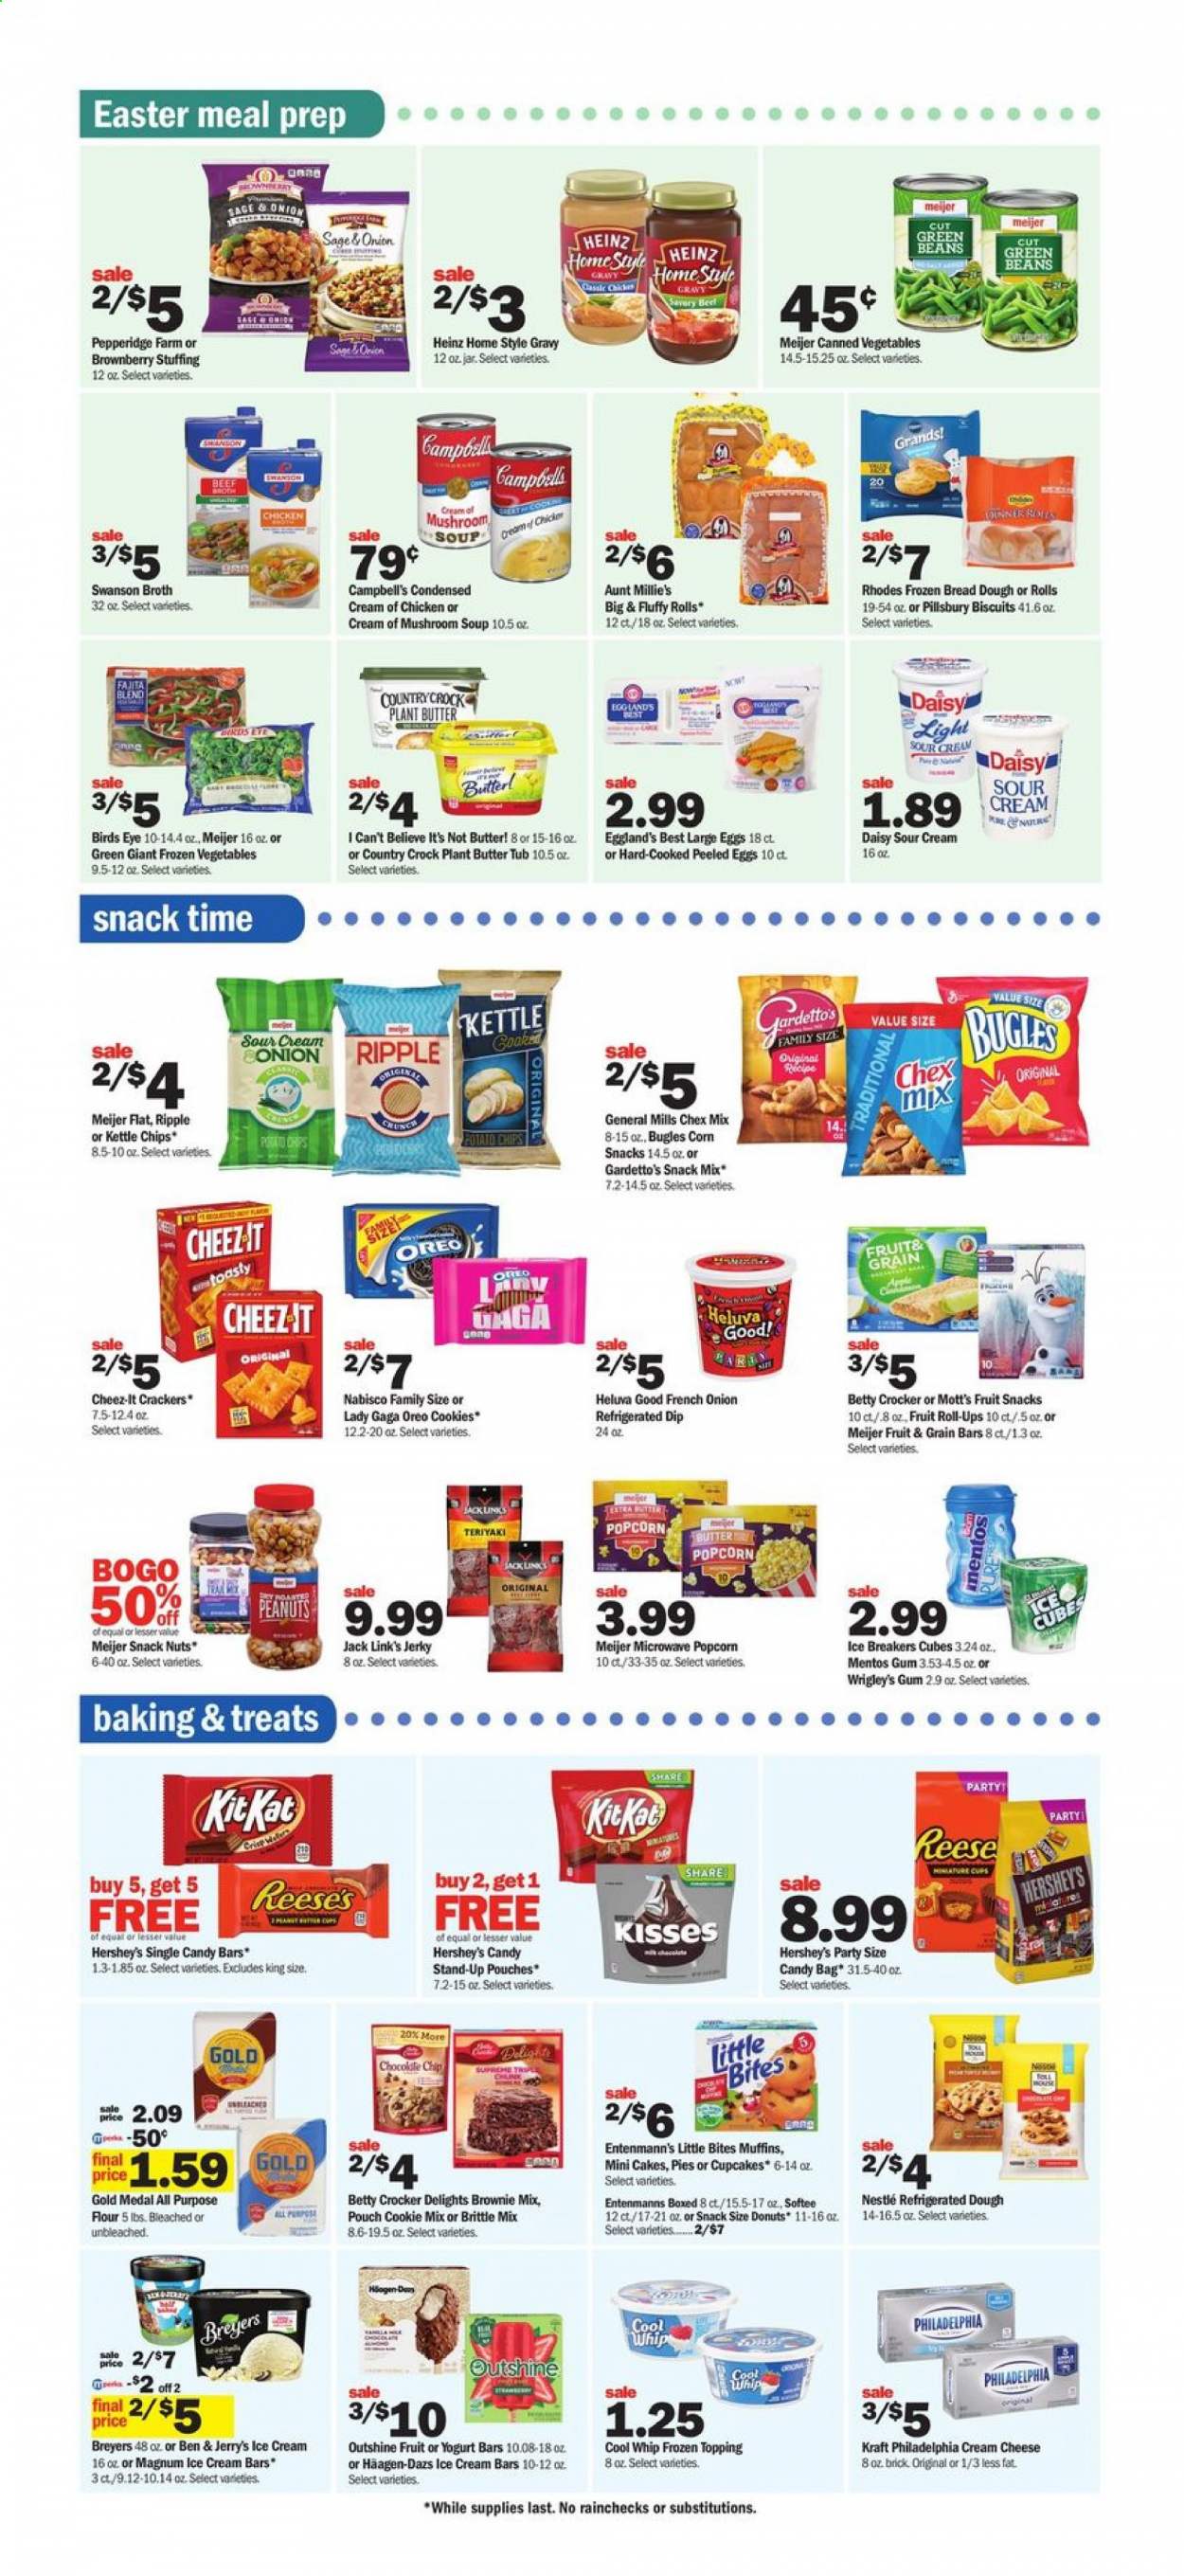 thumbnail - Meijer Flyer - 03/28/2021 - 04/03/2021 - Sales products - mushrooms, bread, brownie mix, cupcake, cake, donut, muffin, Entenmann's, Little Bites, bread dough, beans, Campbell's, cream cheese, mushroom soup, soup, Pillsbury, Bird's Eye, fajita, Kraft®, jerky, Philadelphia, cheese, Oreo, yoghurt, large eggs, butter, I Can't Believe It's Not Butter, Cool Whip, sour cream, dip, ice cream, ice cream bars, Reese's, Hershey's, Häagen-Dazs, Ben & Jerry's, ice cubes, frozen vegetables, green beans, cookies, Nestlé, Mentos, crackers, biscuit, fruit snack, popcorn, Cheez-It, Jack Link's, Chex Mix, all purpose flour, flour, topping, broth, Heinz, canned vegetables, Mott's, cup, jar, Apple, kettle. Page 4.